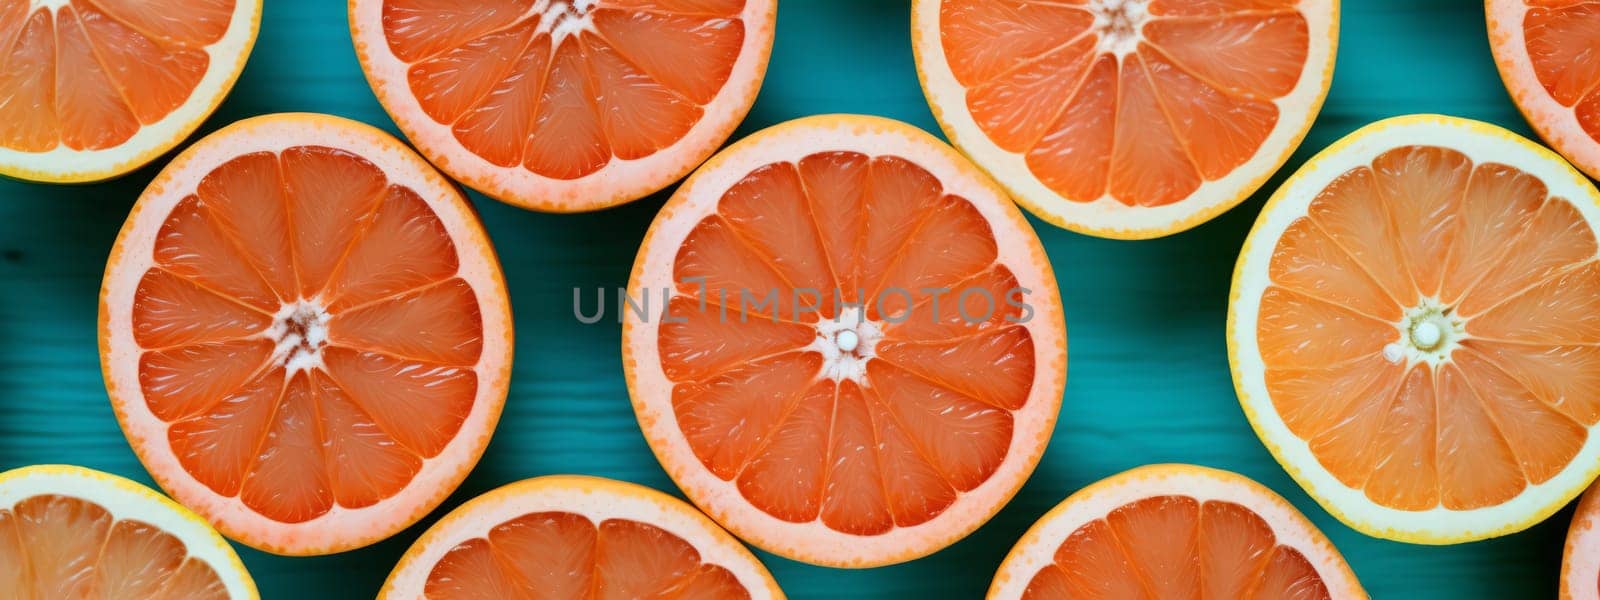 Close-up Grapefruit slices abstract texture background